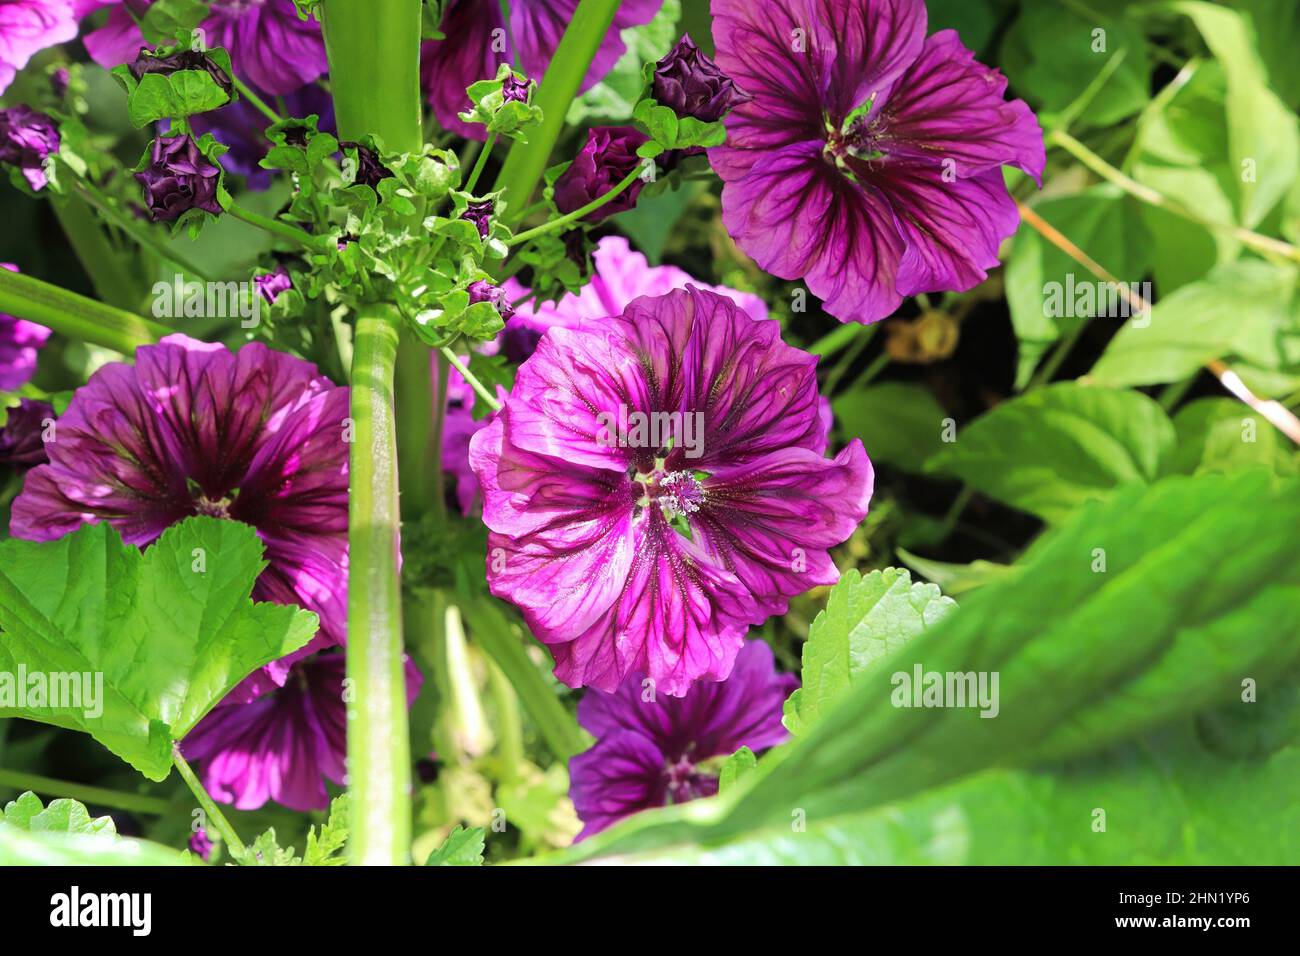 Closeup view of the purple petals on a mallow plant Stock Photo